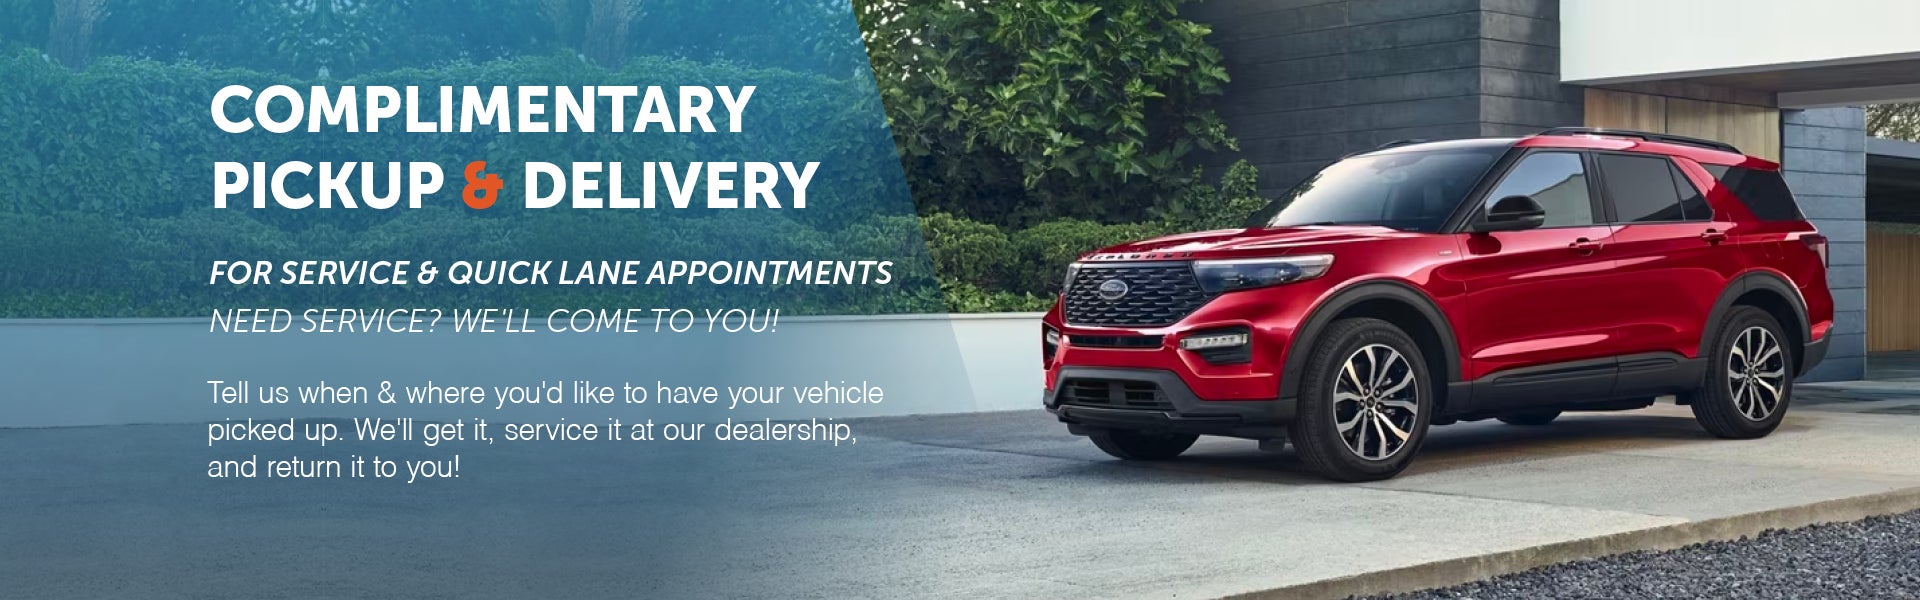 Complimentary Pickup & Delivery | Stoneham Ford in Stoneham MA